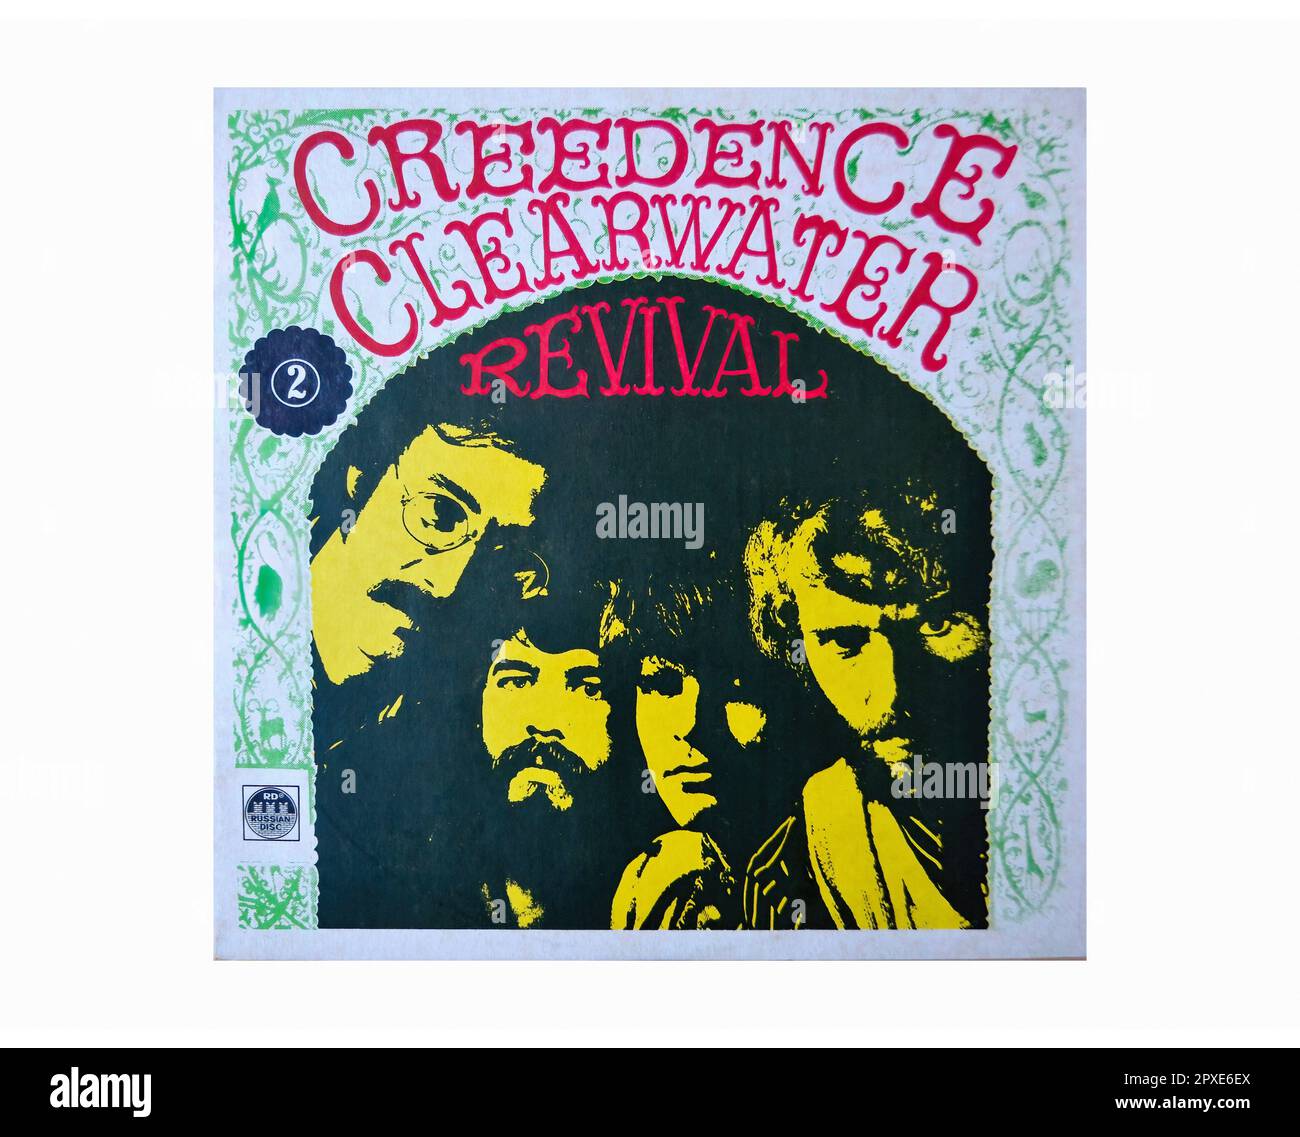 Creedence Clearwater Revival - 2 - Vintage L.P Music Vinyl Record Stock Photo